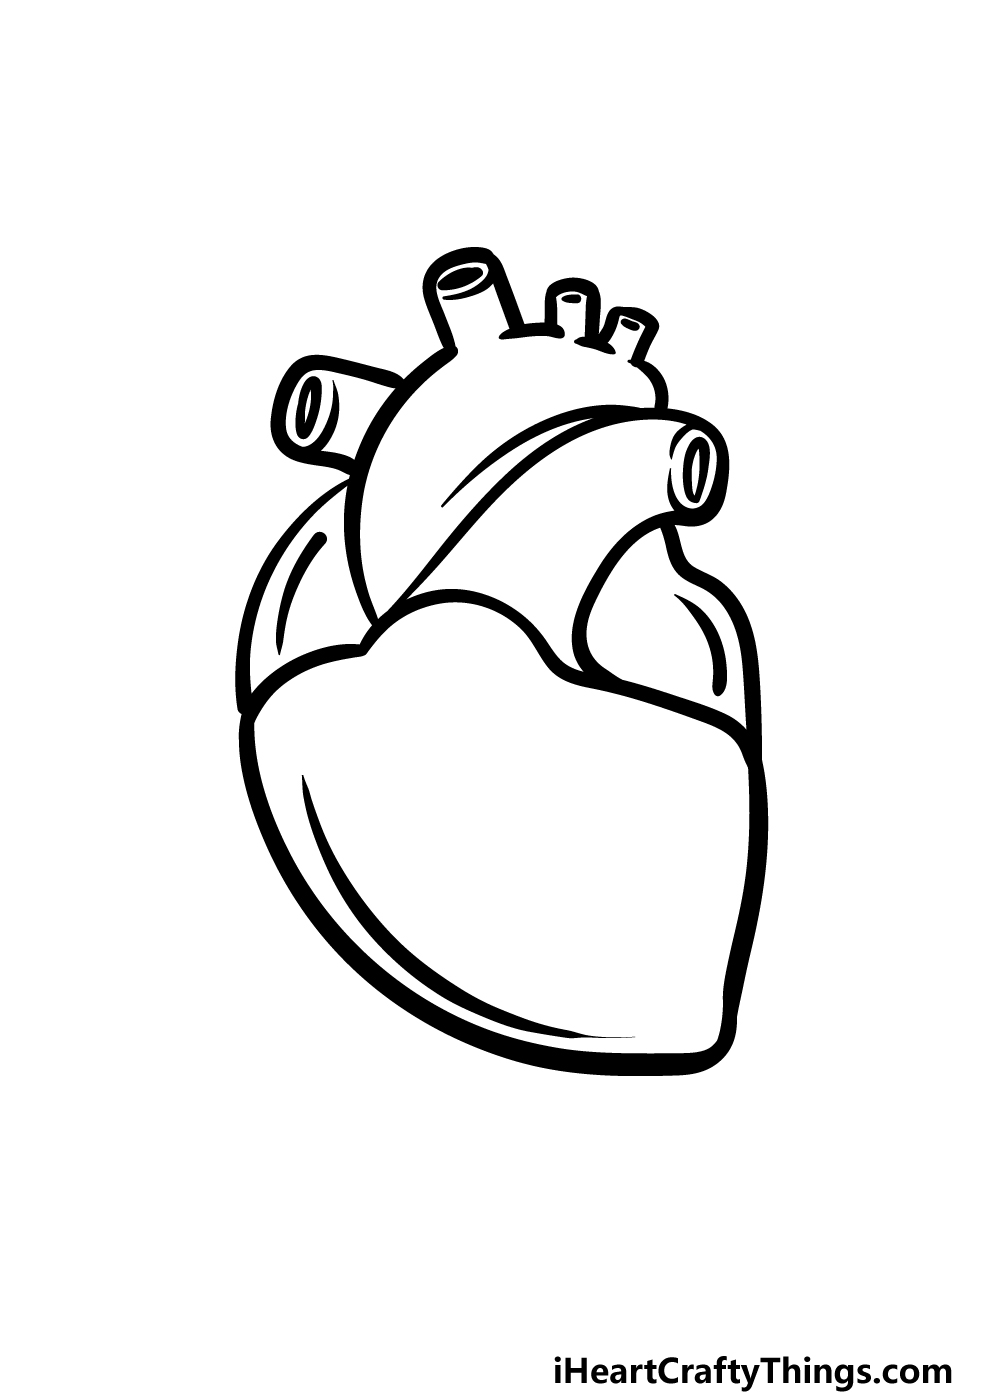 Cartoon Heart Drawing - How To Draw A Cartoon Heart Step By Step